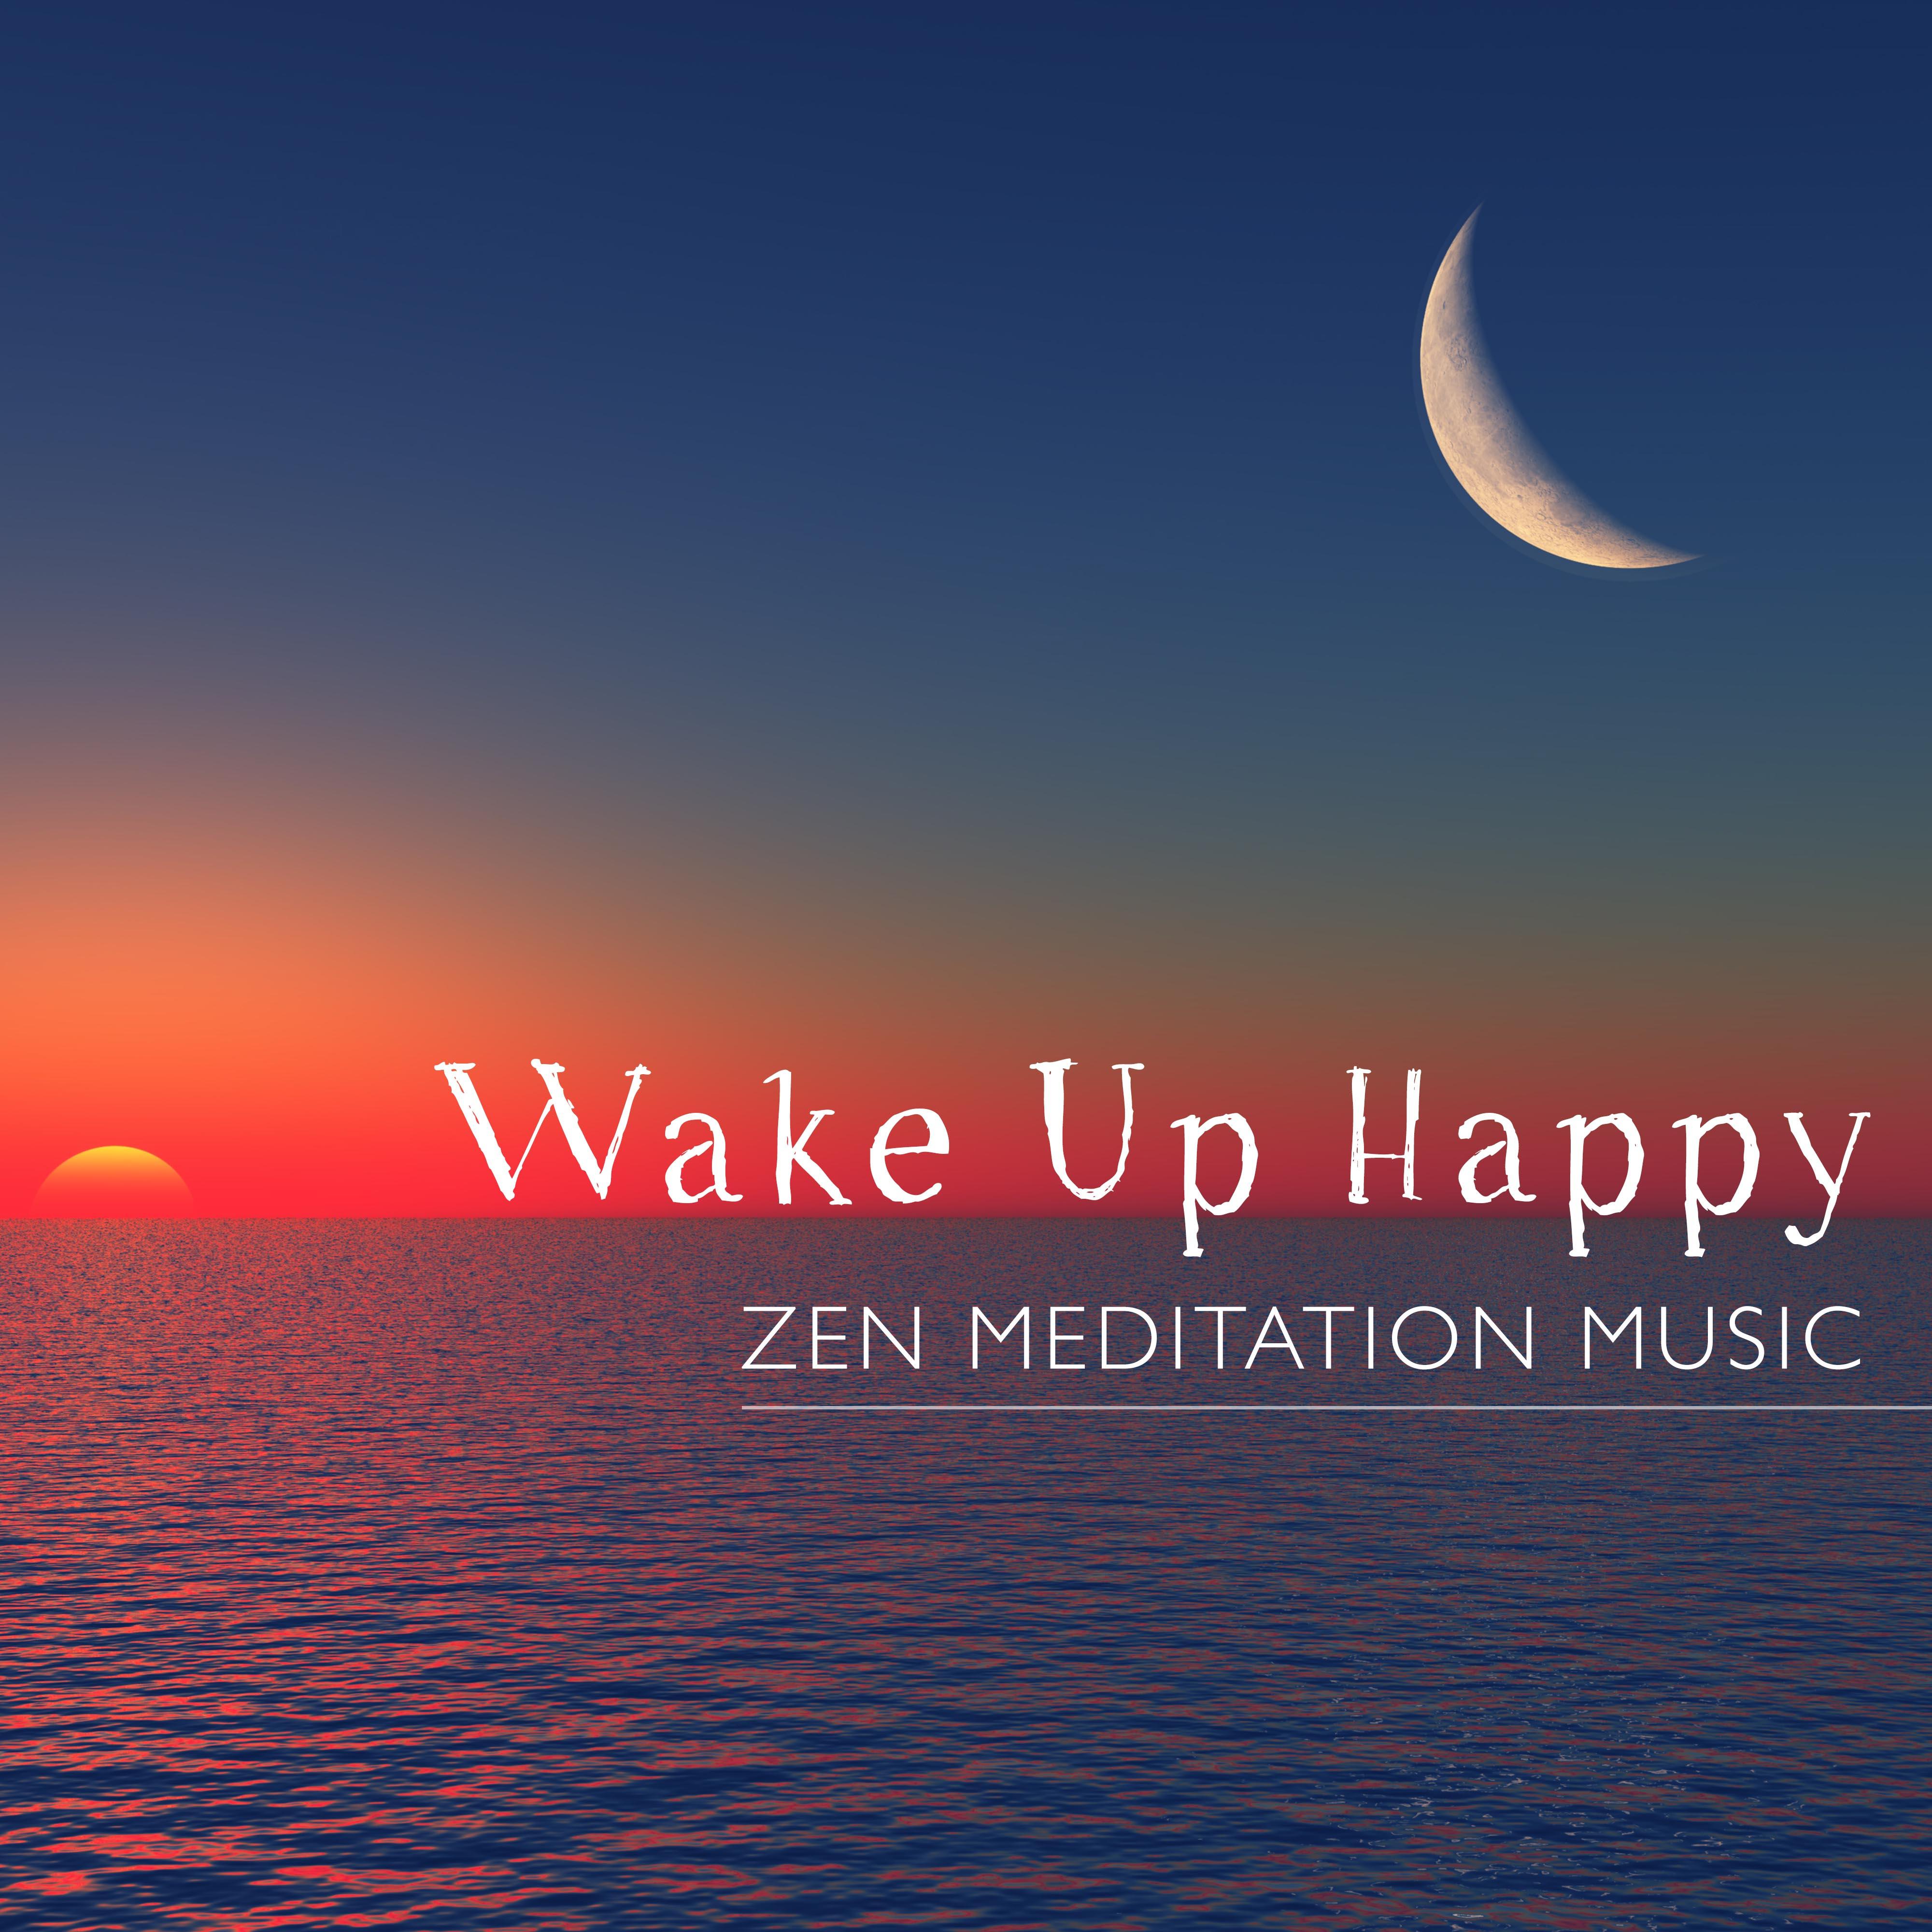 Wake Up Happy - Zen Meditation Music for your Morning Routine